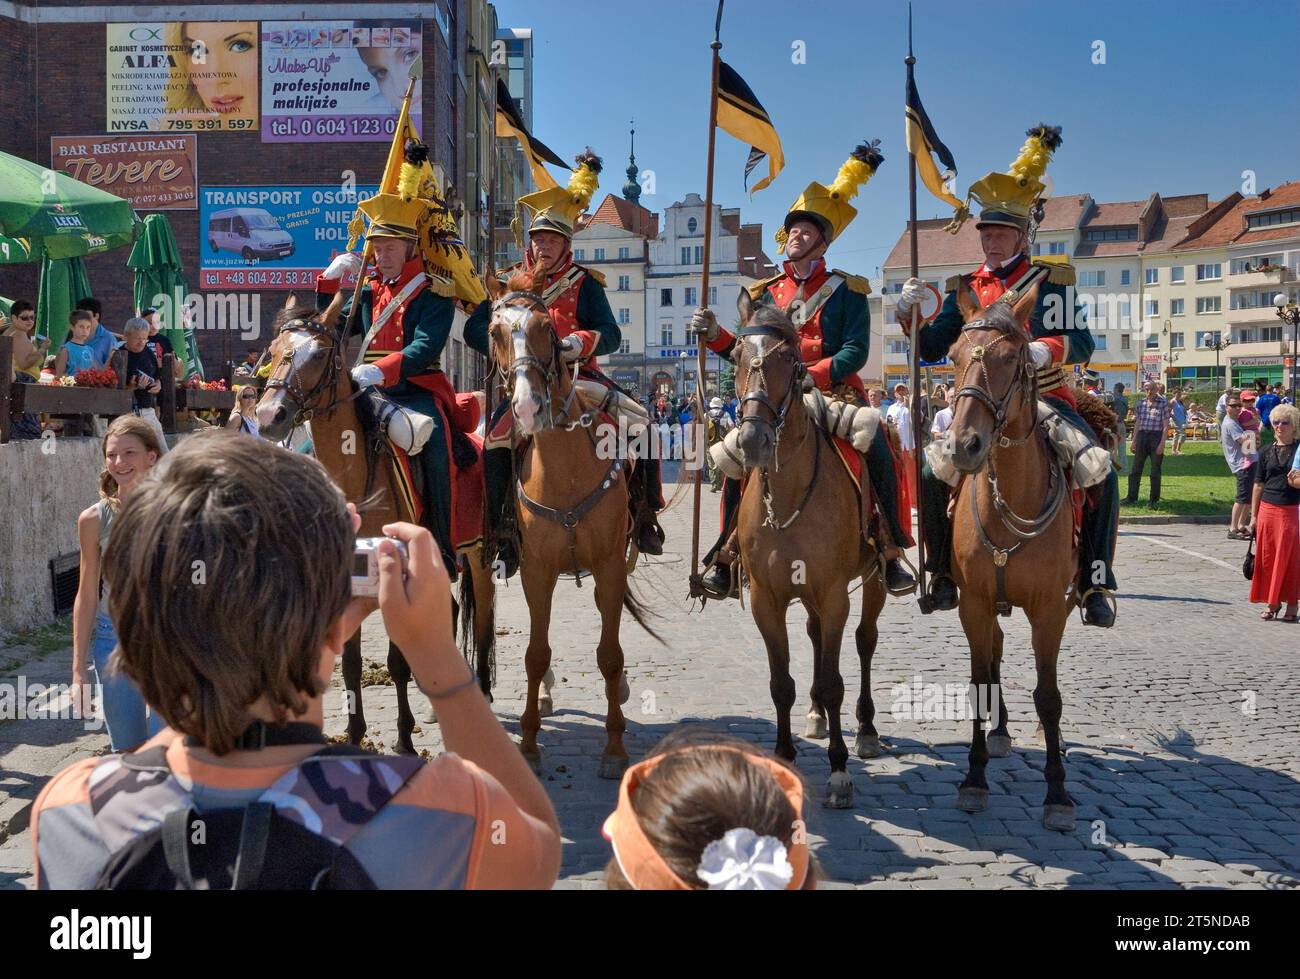 Cavalry reenactors at Market Square before Reenactment of the Siege of Neisse during Napoleonic War with Prussia in 1807, in Nysa, Opolskie, Poland Stock Photo